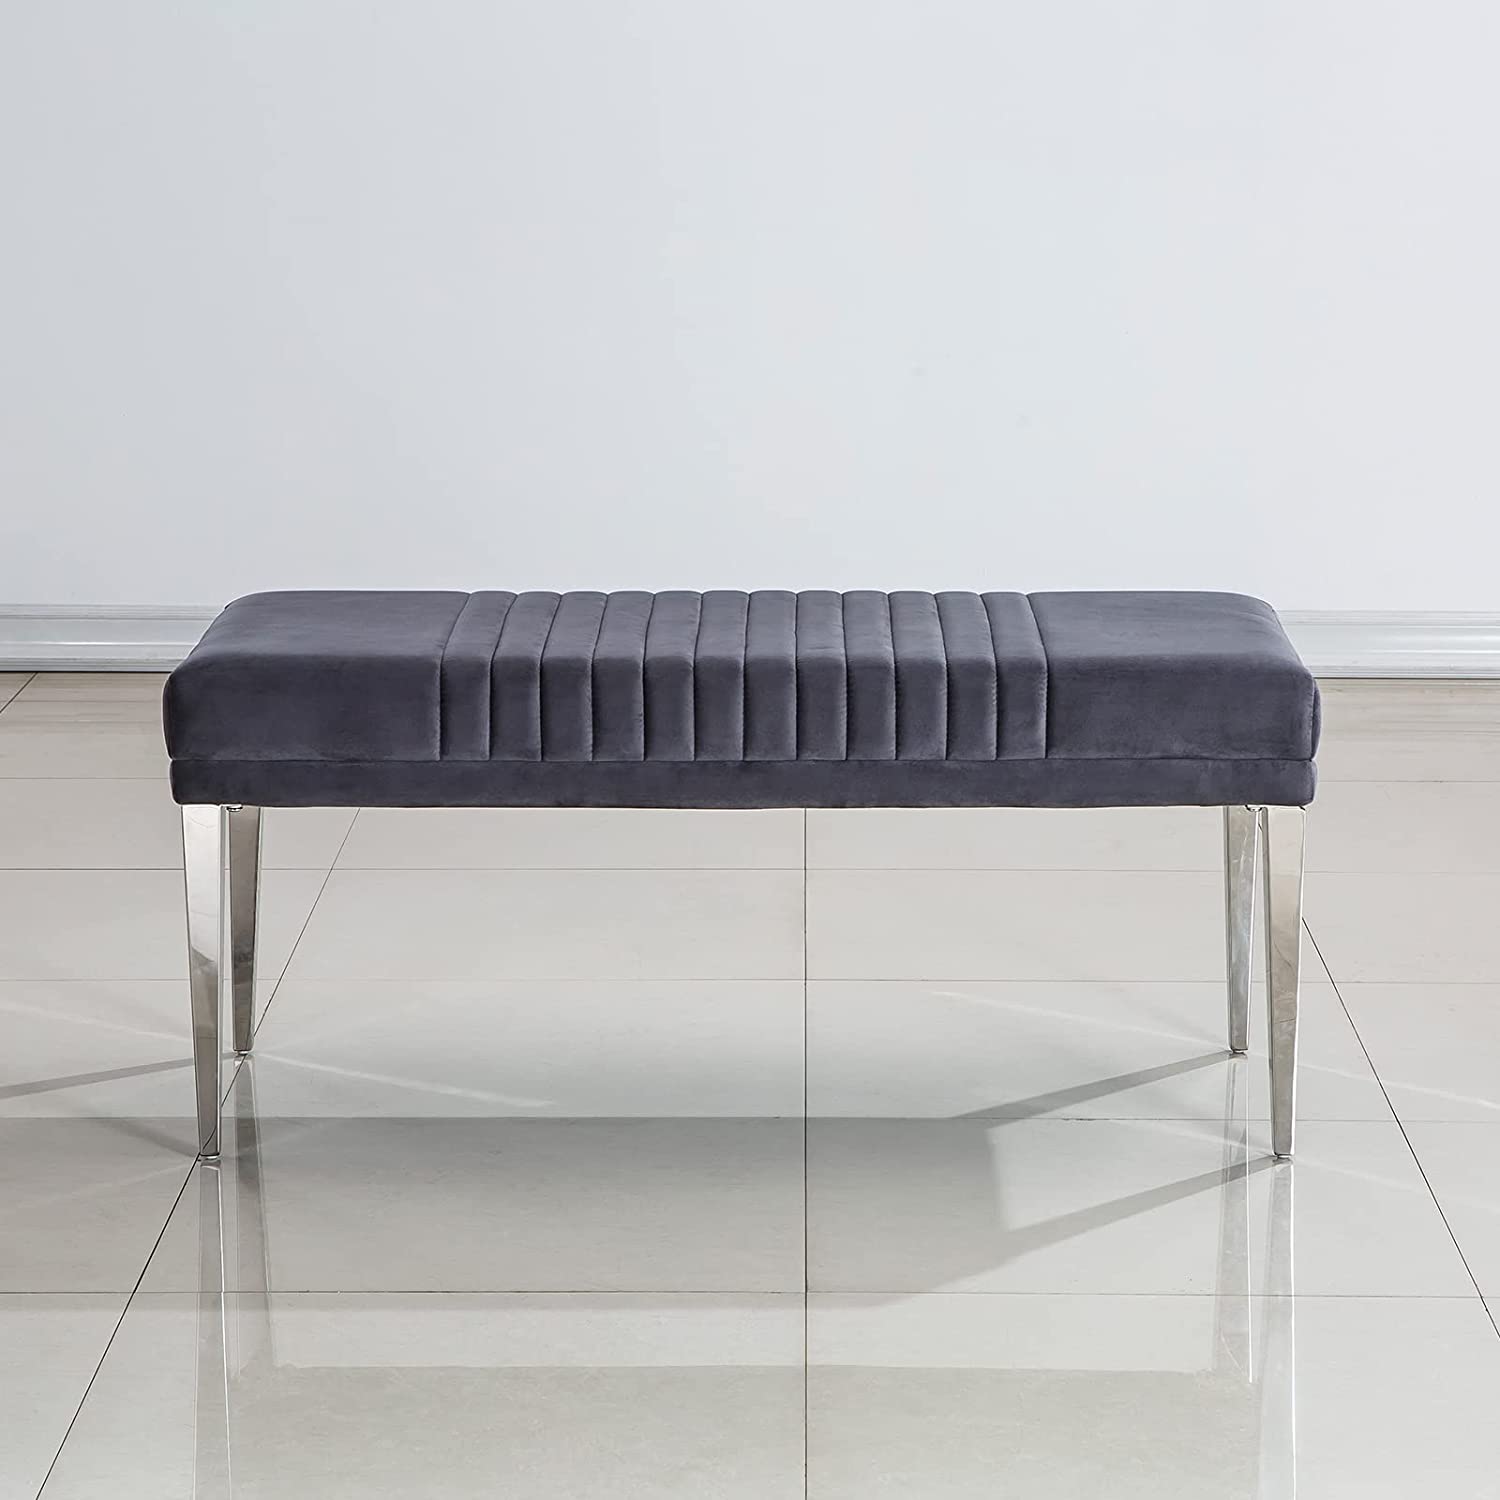 Add Modern Glamour to Your Home with the AUZ Grey Velvet Bench